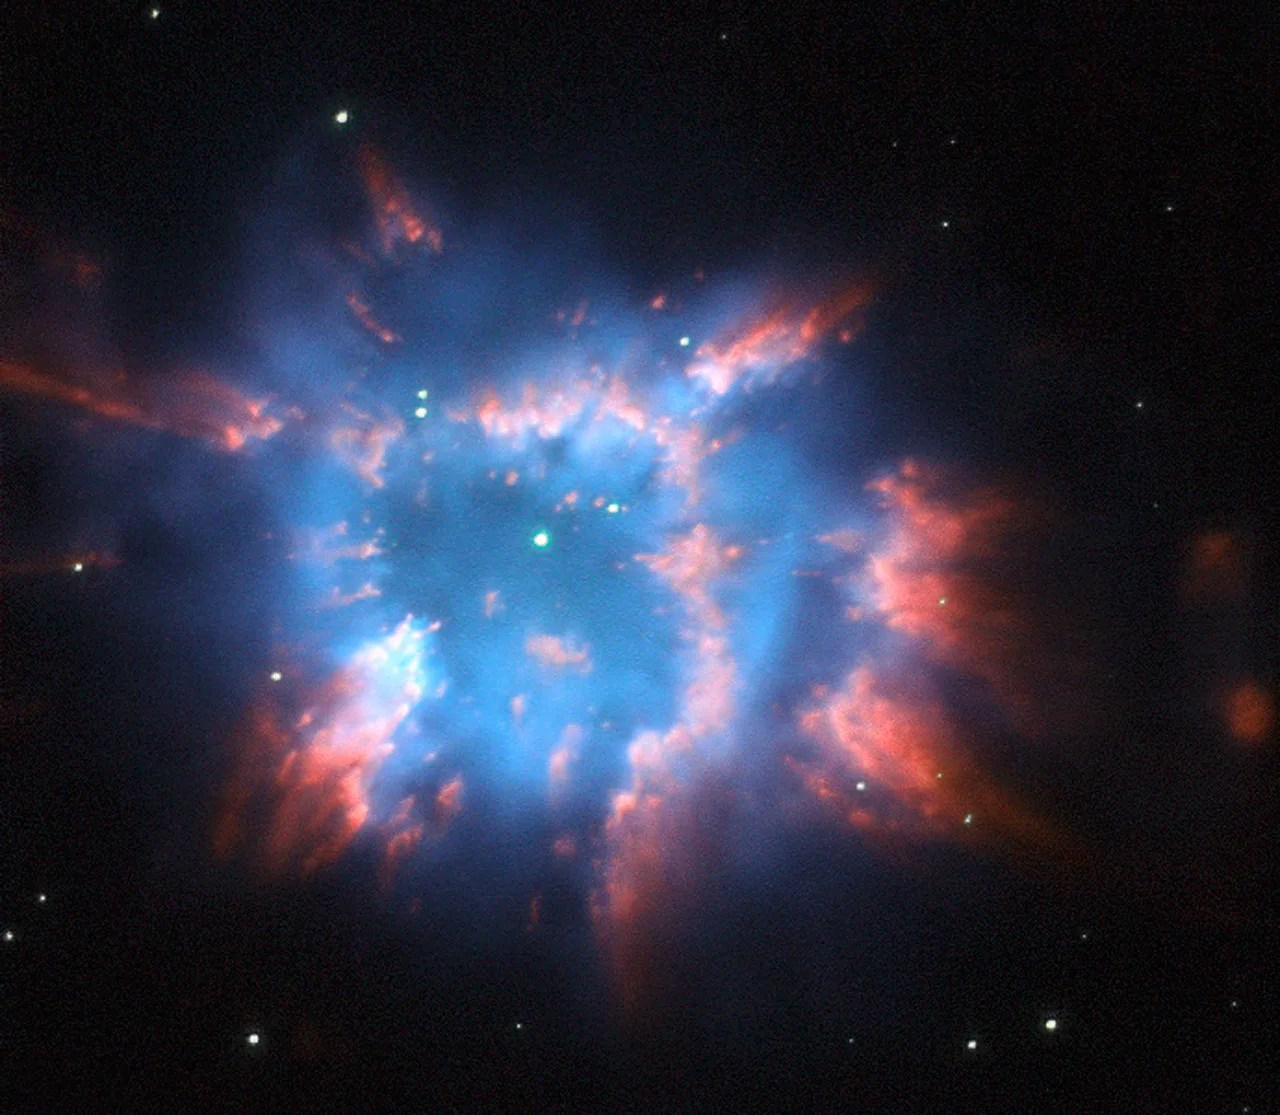 Bright nebula in blue with pink clouds